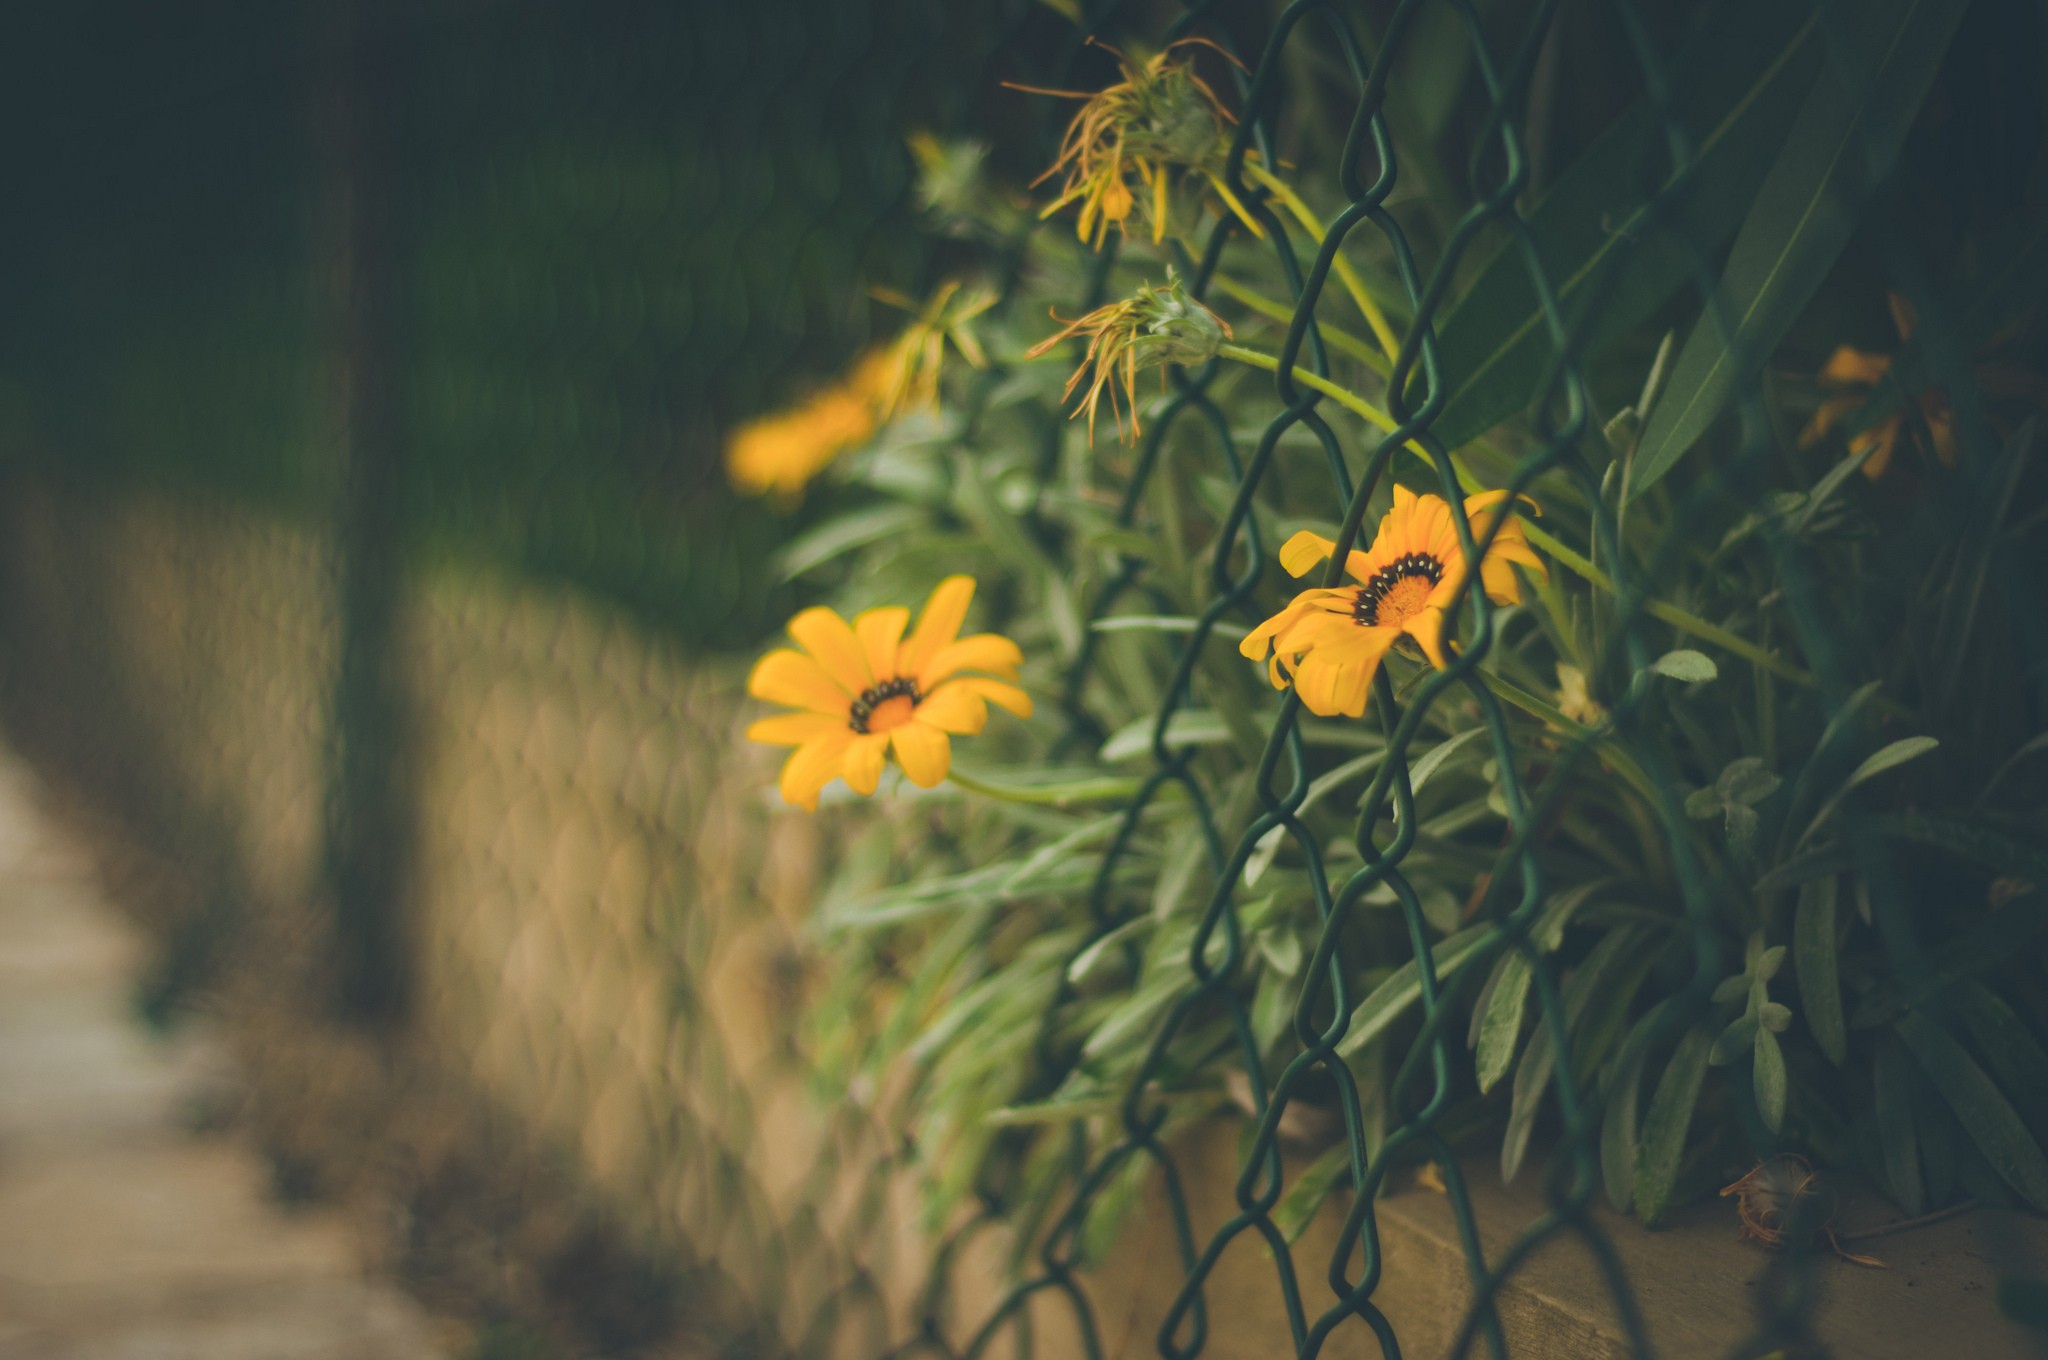 General 2048x1360 flowers plants fence yellow flowers outdoors